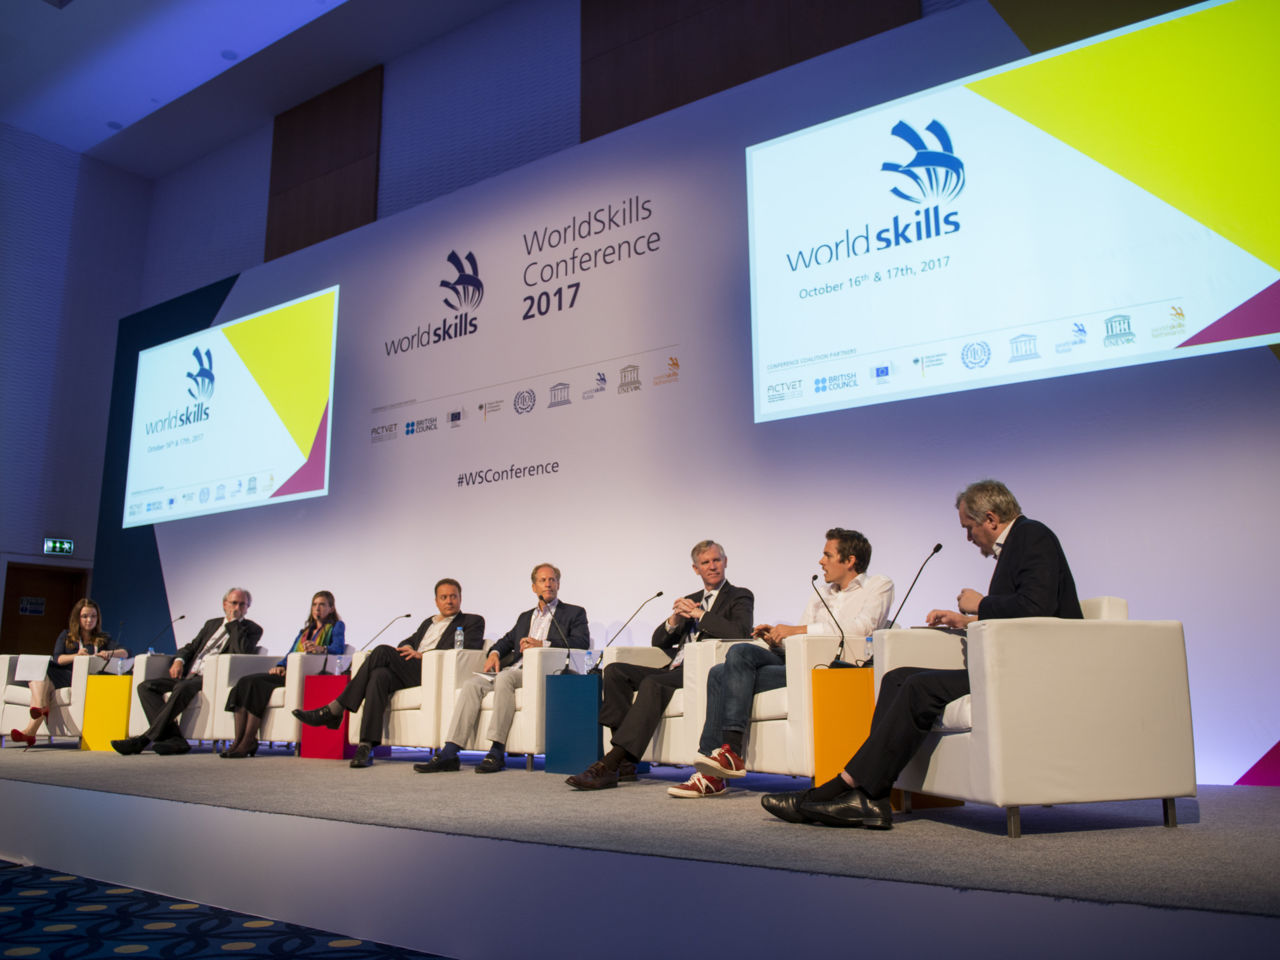 WorldSkills Conference 2017 concludes with global skills community uniting to identify a pathway for progress